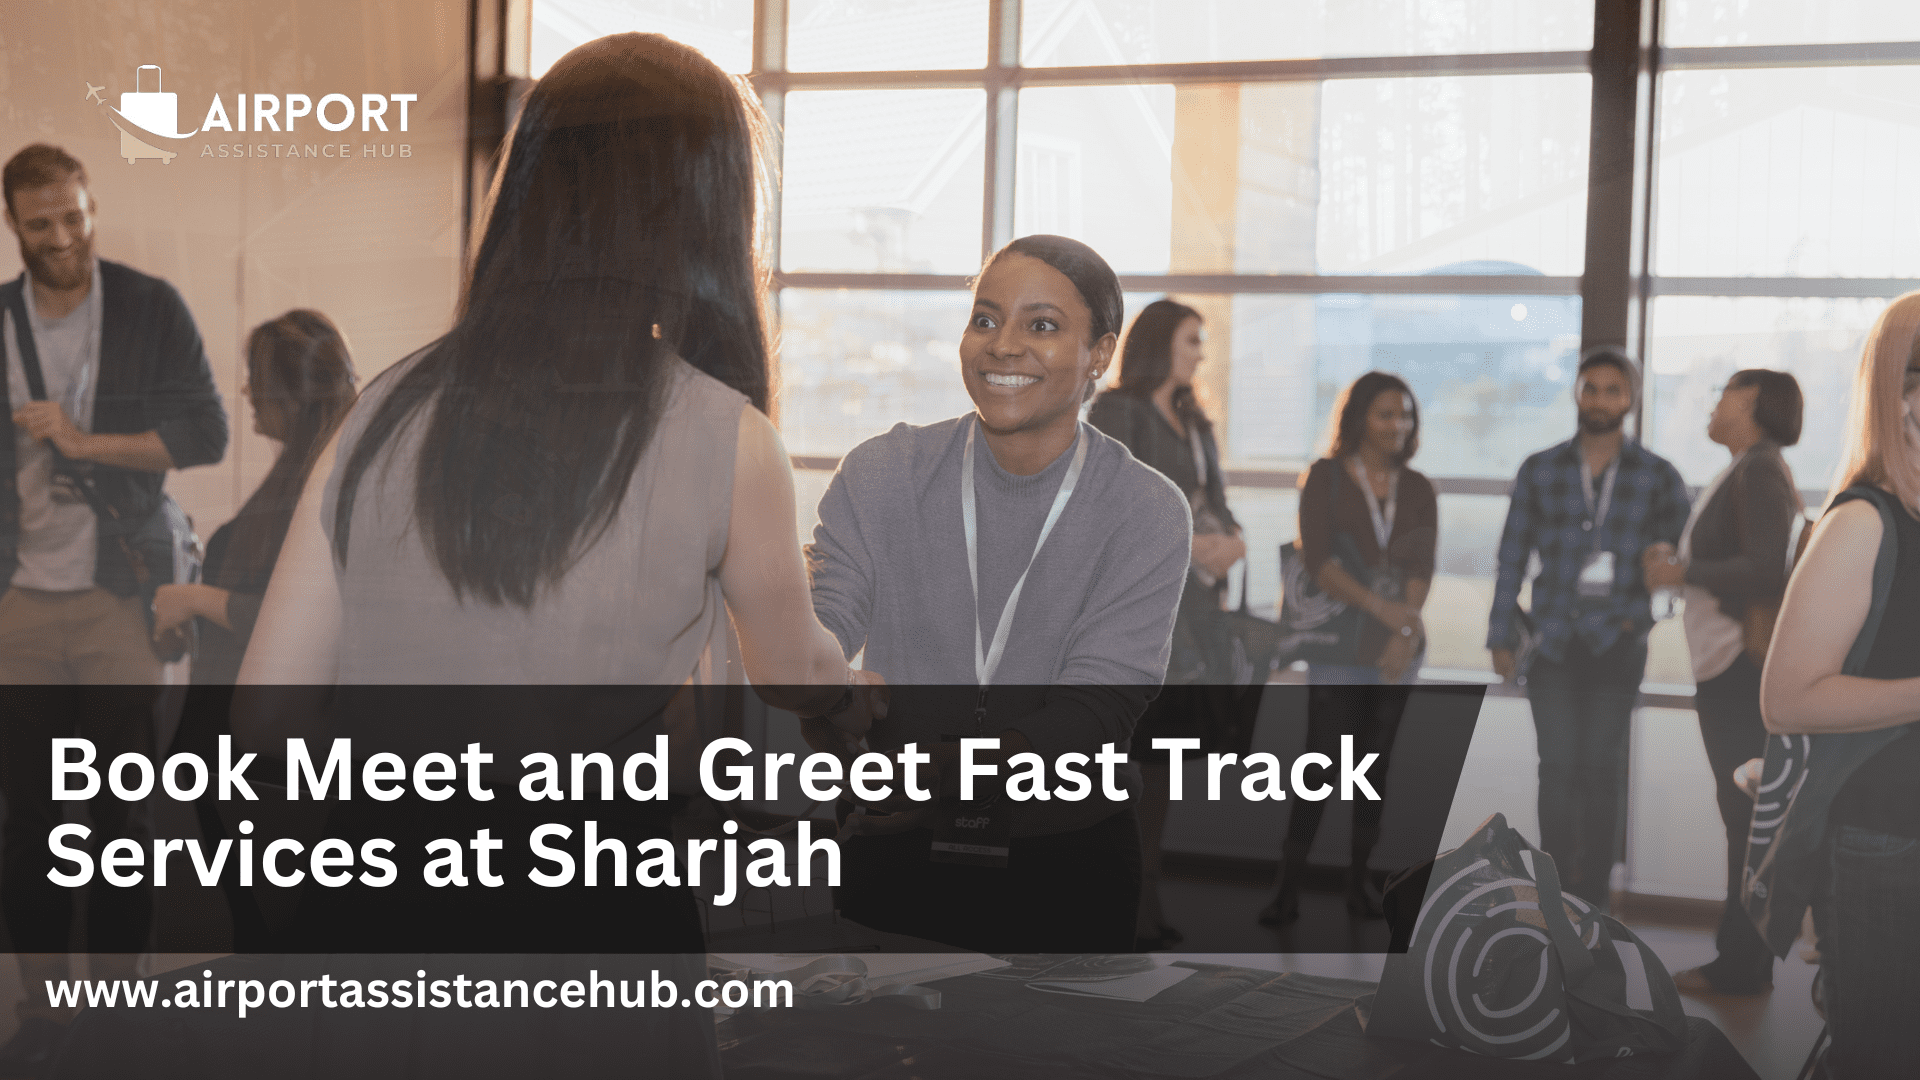 Book Fast Track Meet and Greet Services at Sharjah